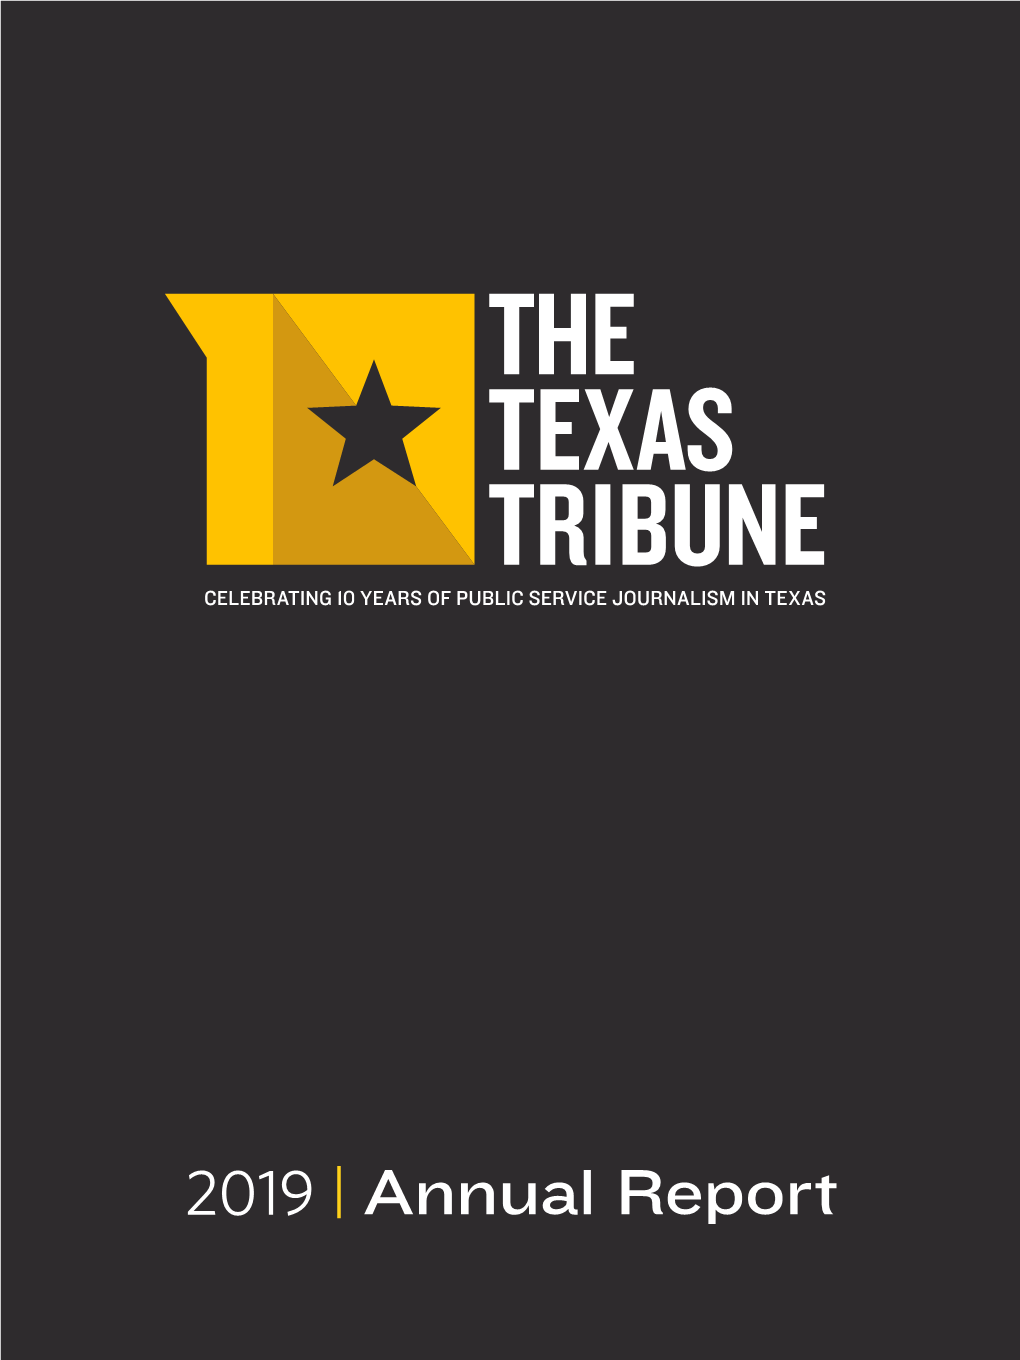 Celebrating 10 Years of Public Service Journalism in Texas